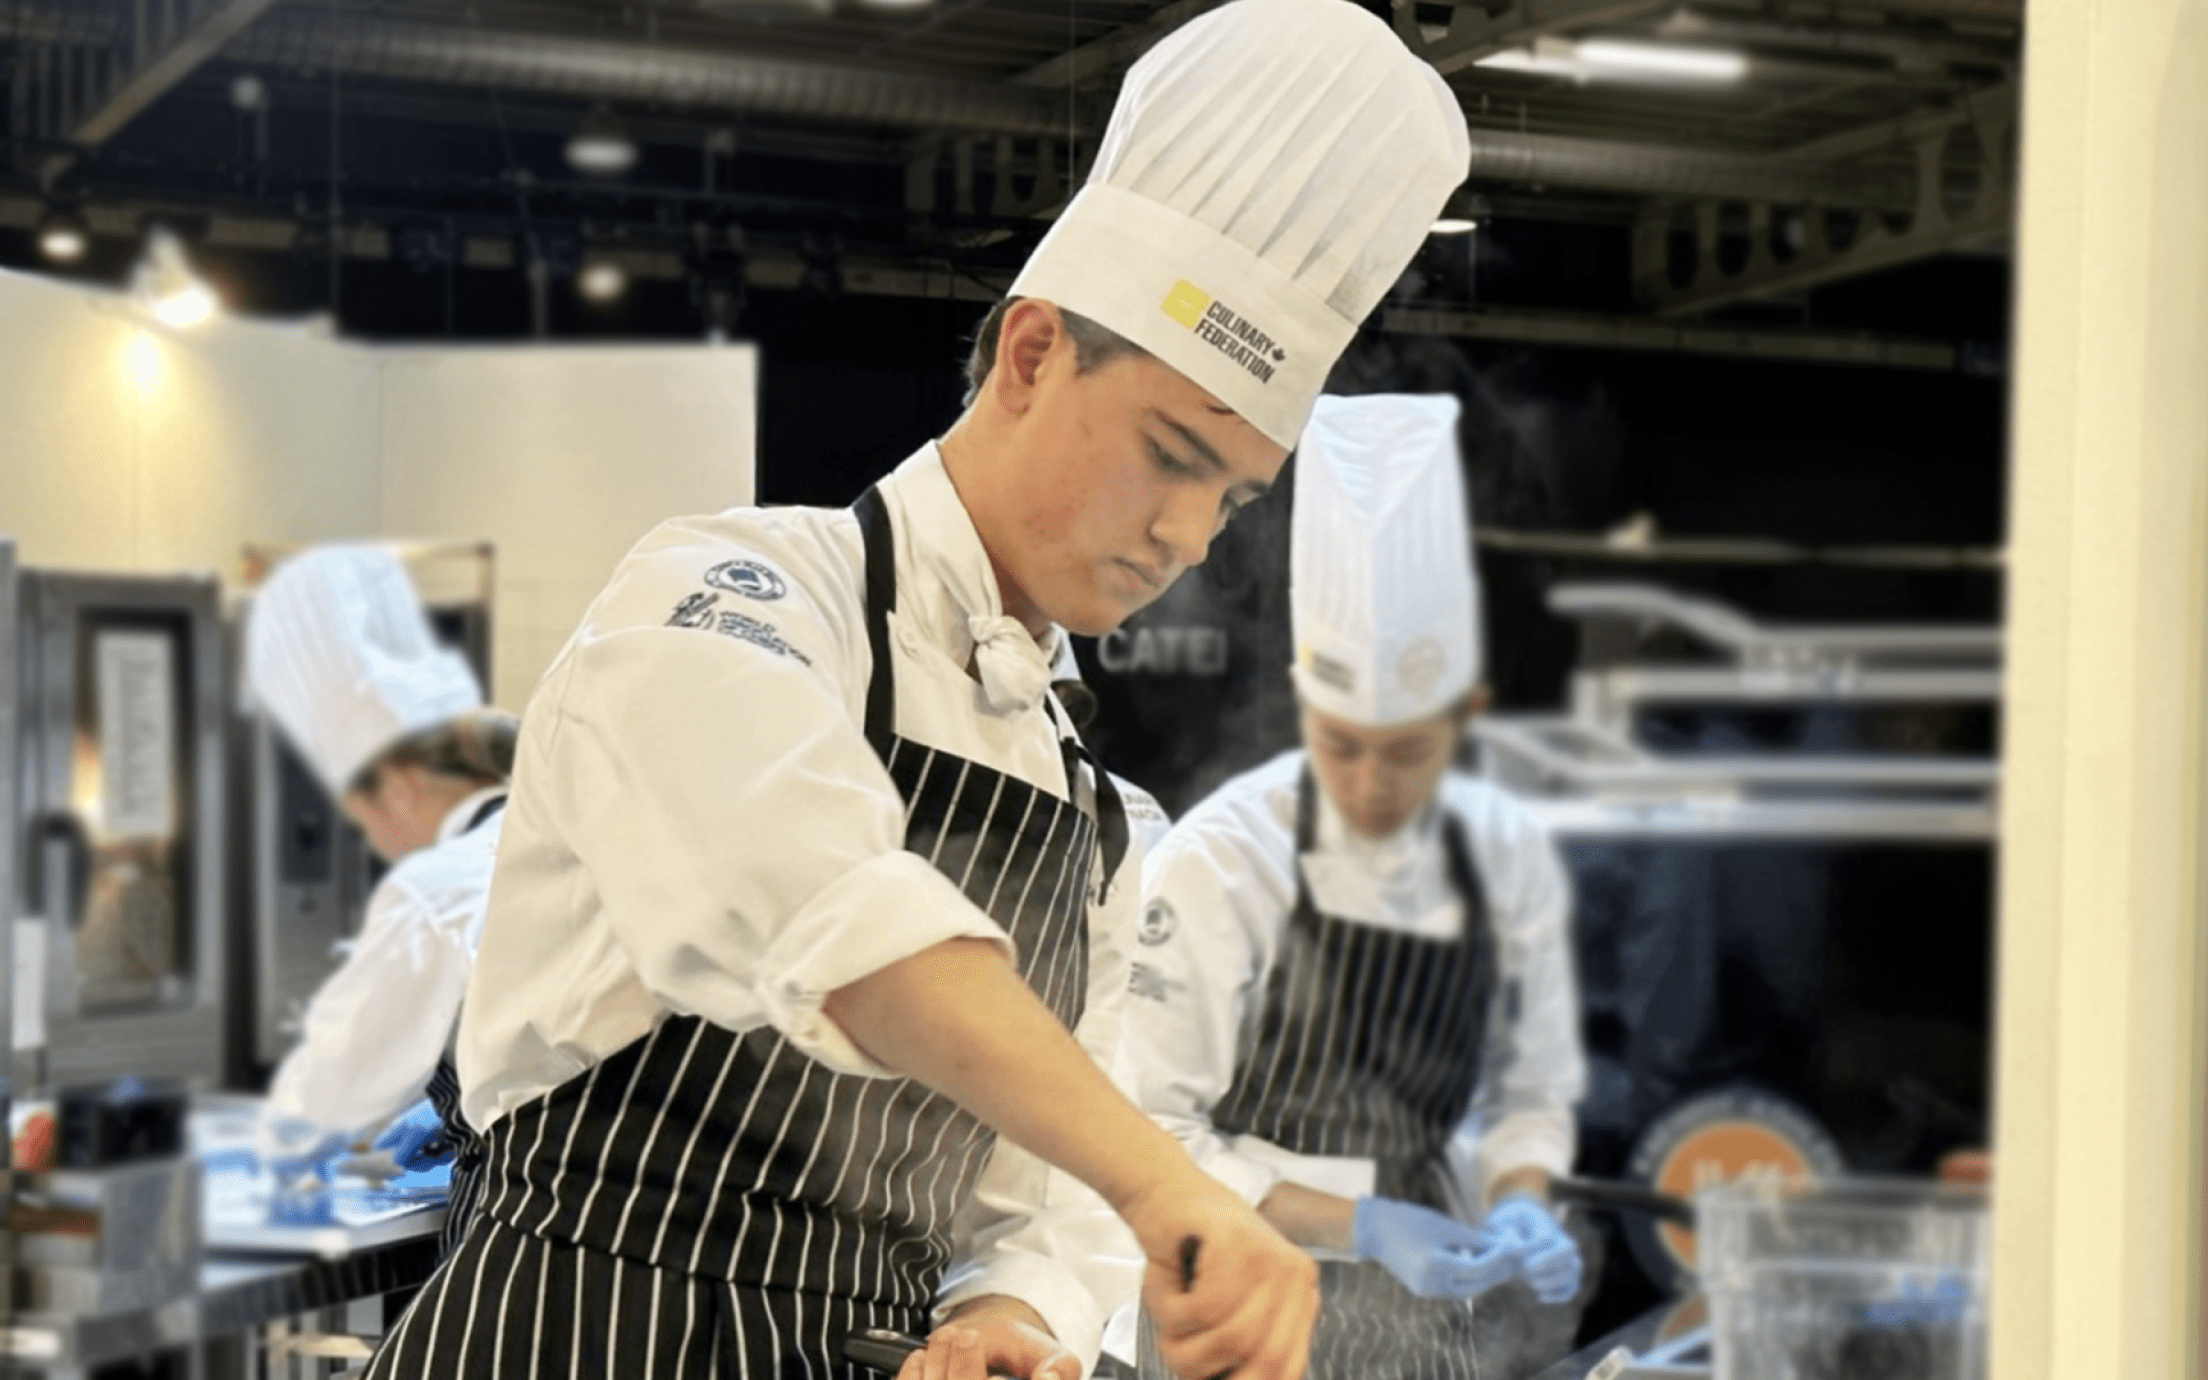 Ottis Crabbe wearing chef's hat and full cooking attire preparing a dish in a pot on a stove in an industrial kitchen during a competition.